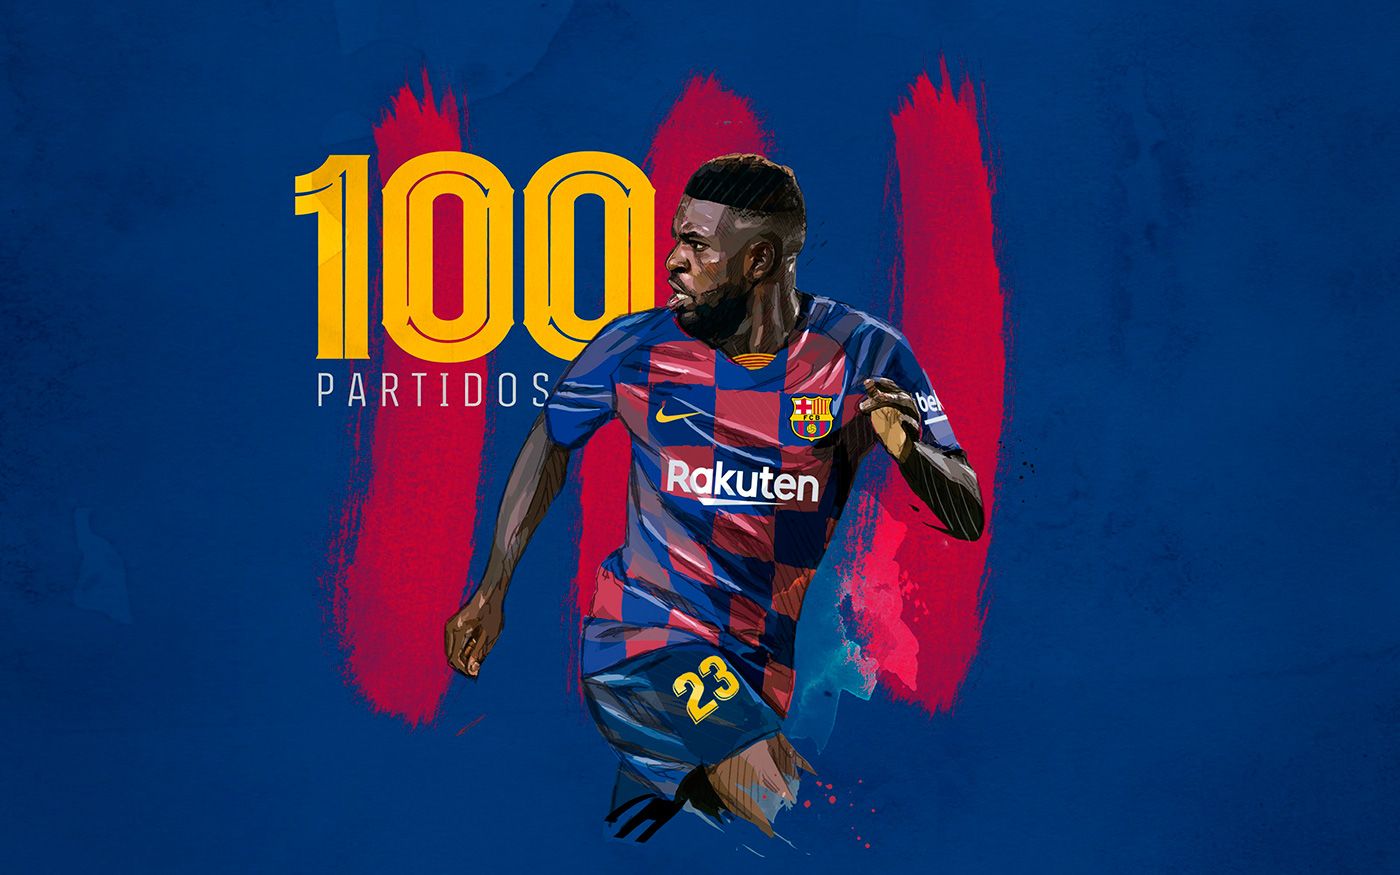 Umtiti Fulfilled 100 parties with the Barça - Photo: Twitter FCB